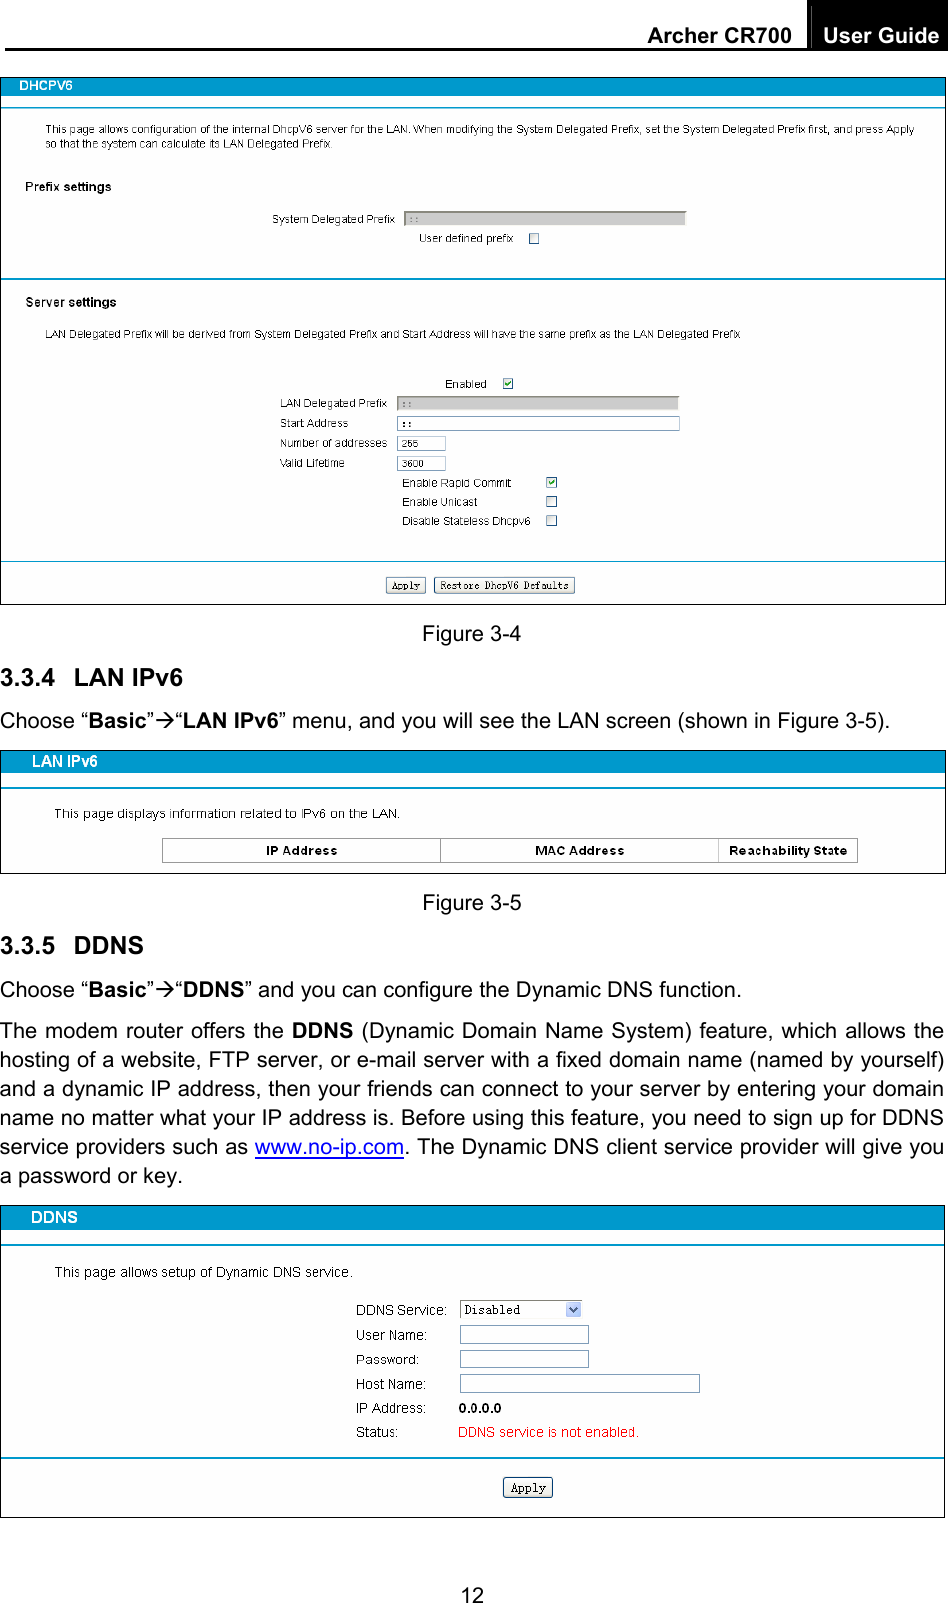 Archer CR700  User Guide 12  Figure 3-4 3.3.4  LAN IPv6 Choose “Basic”Æ“LAN IPv6” menu, and you will see the LAN screen (shown in Figure 3-5).    Figure 3-5 3.3.5  DDNS Choose “Basic”Æ“DDNS” and you can configure the Dynamic DNS function.   The modem router offers the DDNS (Dynamic Domain Name System) feature, which allows the hosting of a website, FTP server, or e-mail server with a fixed domain name (named by yourself) and a dynamic IP address, then your friends can connect to your server by entering your domain name no matter what your IP address is. Before using this feature, you need to sign up for DDNS service providers such as www.no-ip.com. The Dynamic DNS client service provider will give you a password or key.  